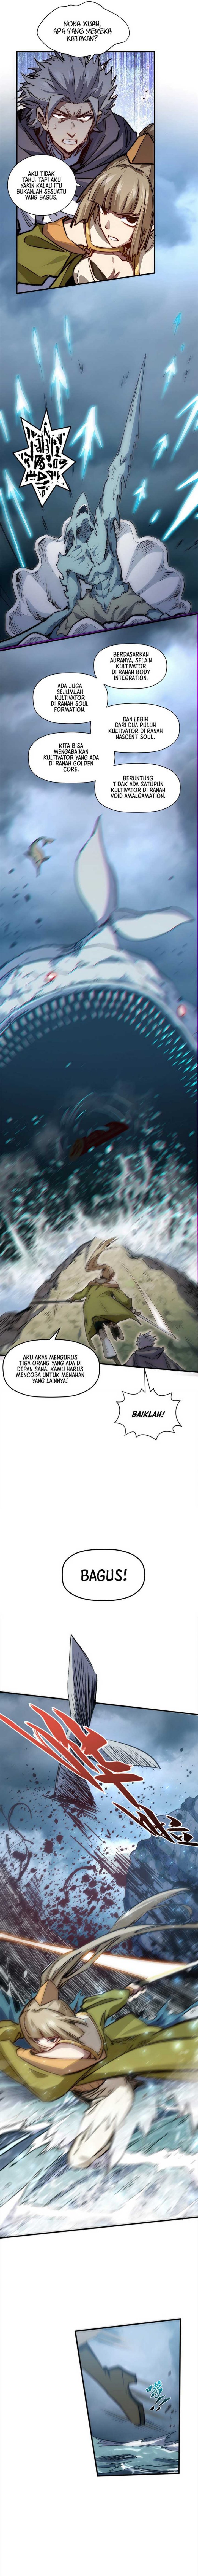 Dilarang COPAS - situs resmi www.mangacanblog.com - Komik top tier providence secretly cultivate for a thousand years 119 - chapter 119 120 Indonesia top tier providence secretly cultivate for a thousand years 119 - chapter 119 Terbaru 10|Baca Manga Komik Indonesia|Mangacan